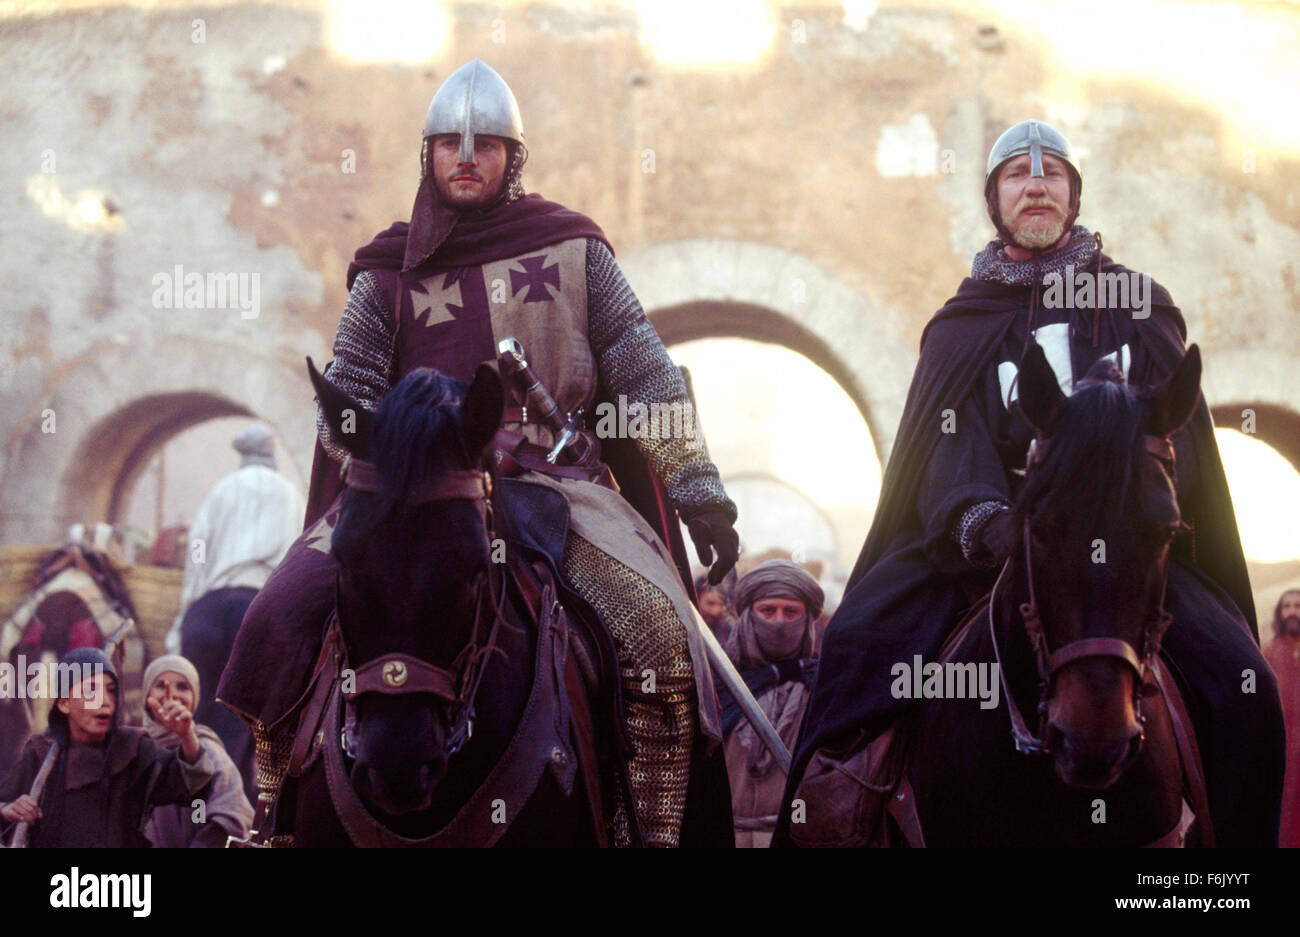 Release Date May 6 2005 Movie Title Kingdom Of Heaven Studio 20th